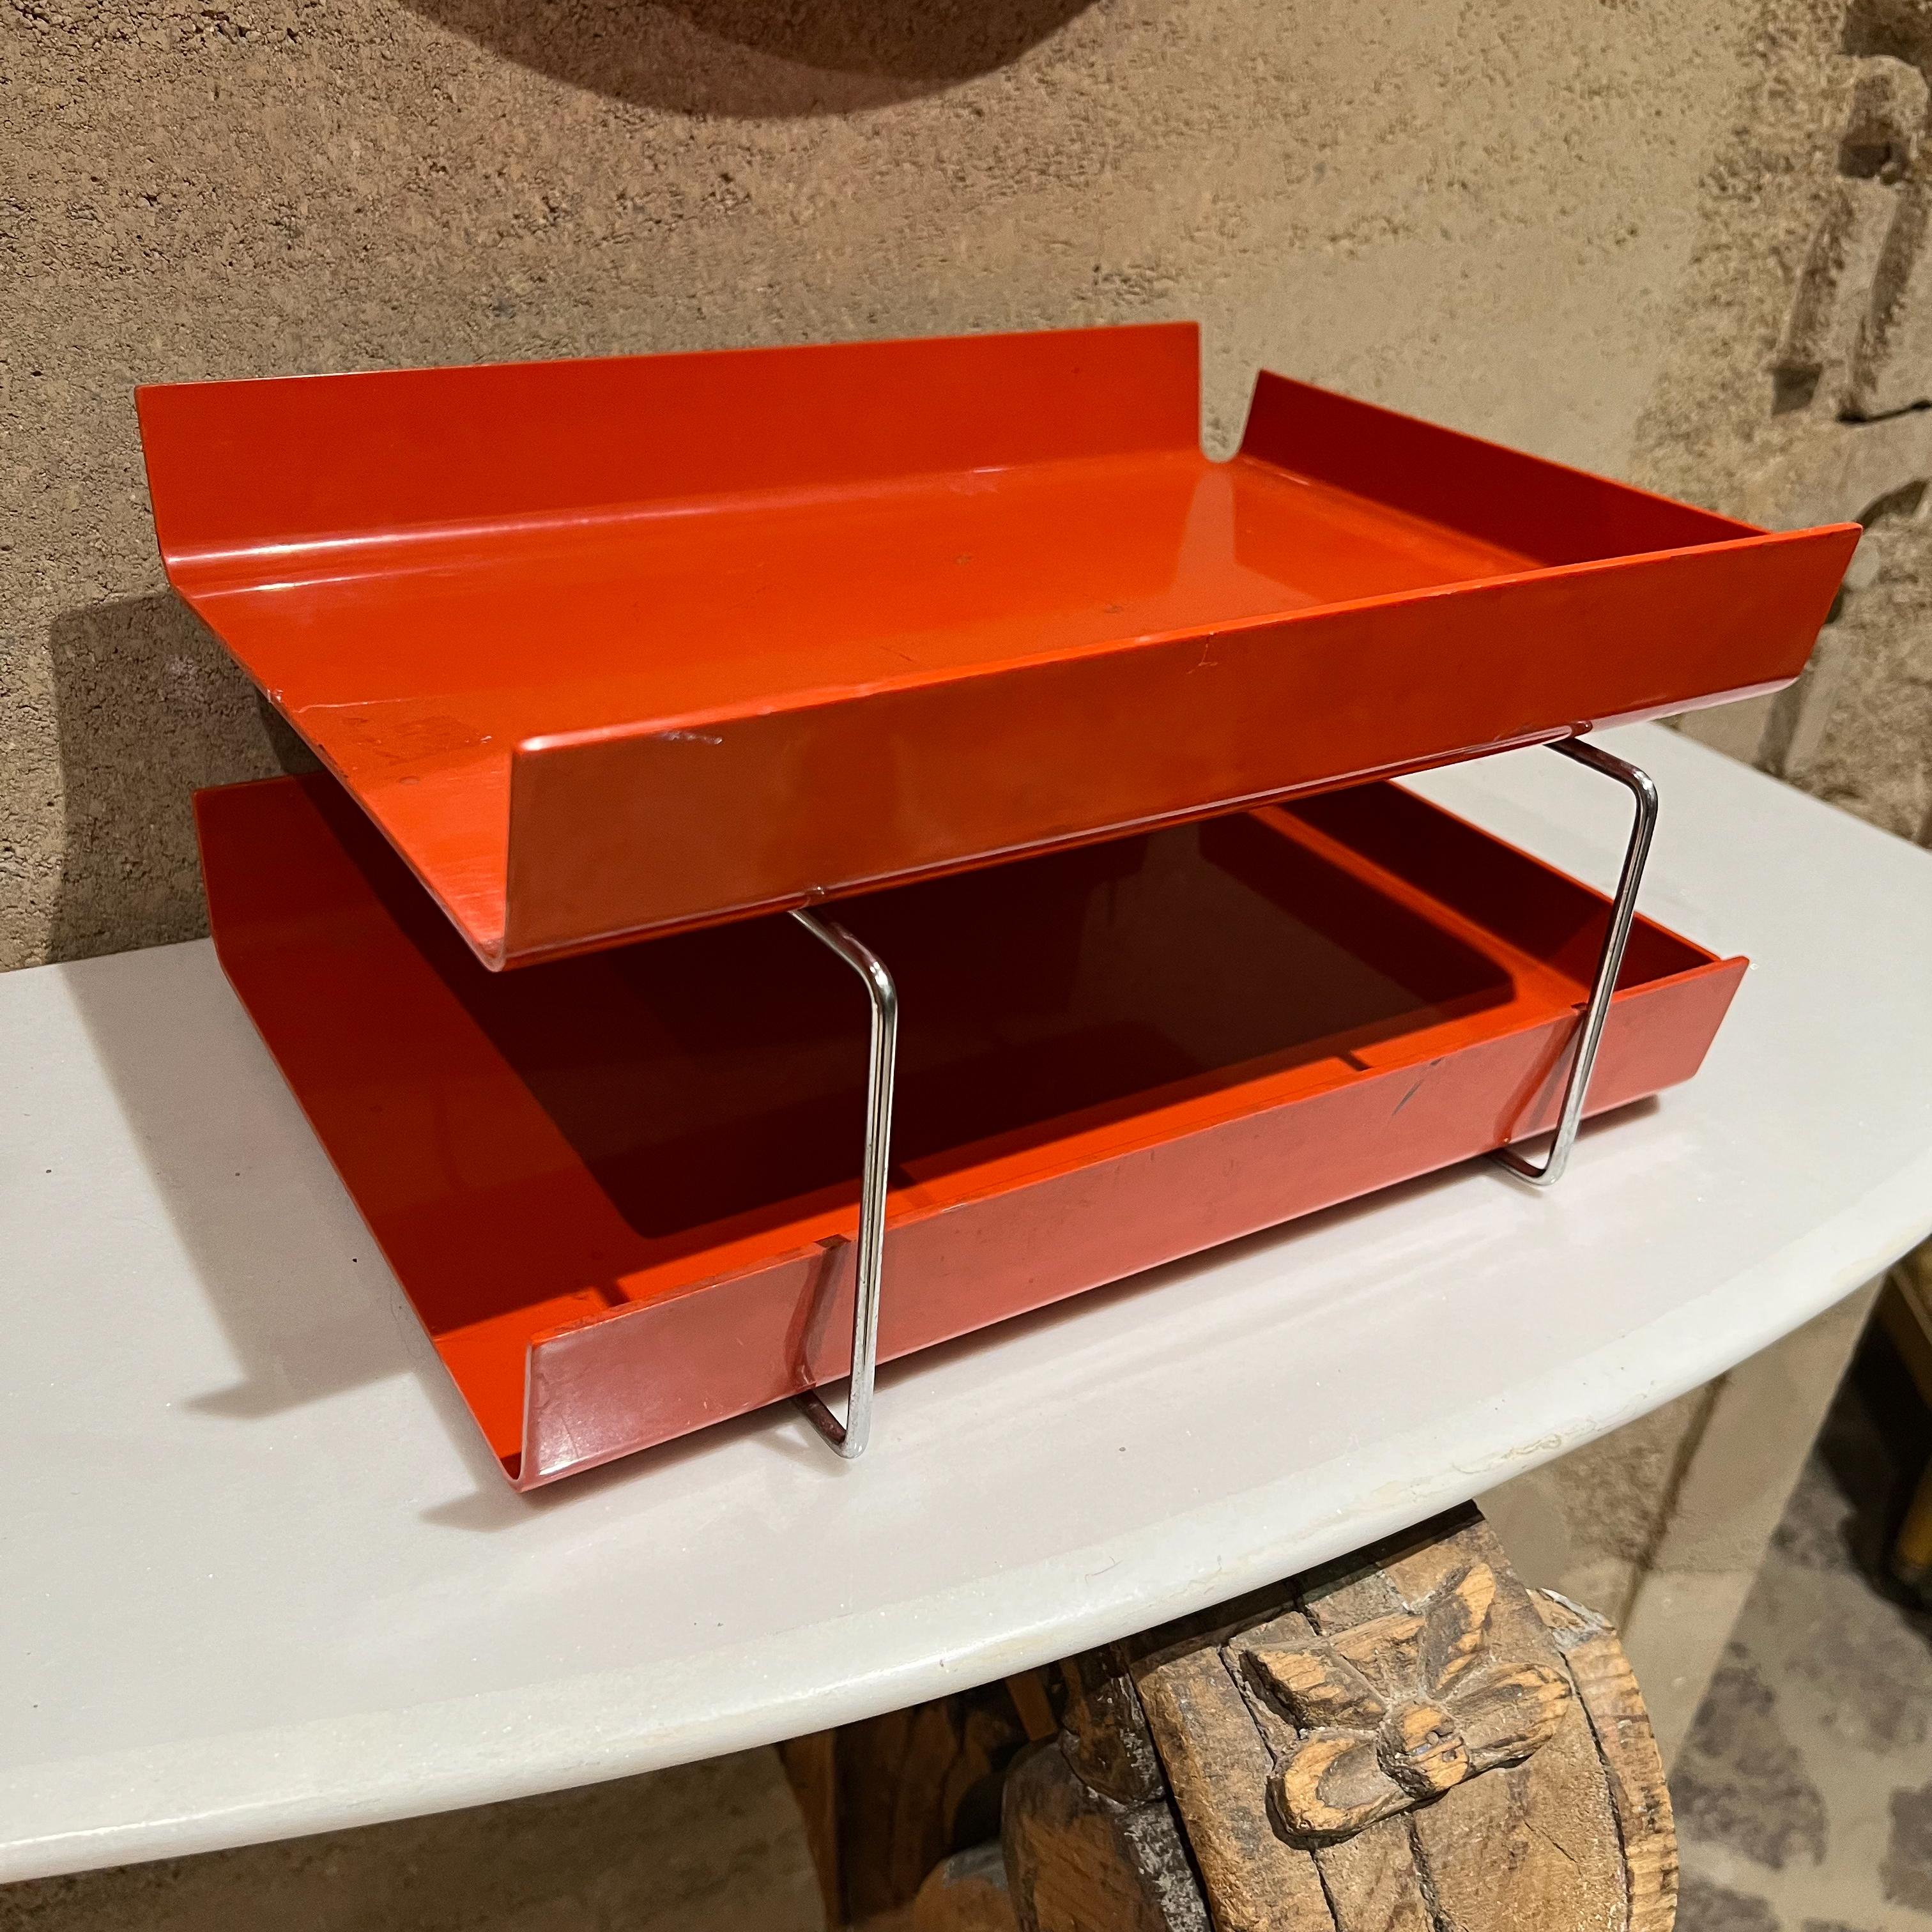 Desk tray
1980s Postmodern tiered office file tray in red chrome accents Joe Colombo Era
Mid-Century Modern stylish desk tray in red plastic with chrome frame.
1980s USA Joe Colombo era.
Measures: 6.75 tall x 10 wide x 13.75
Stamp present
Preowned